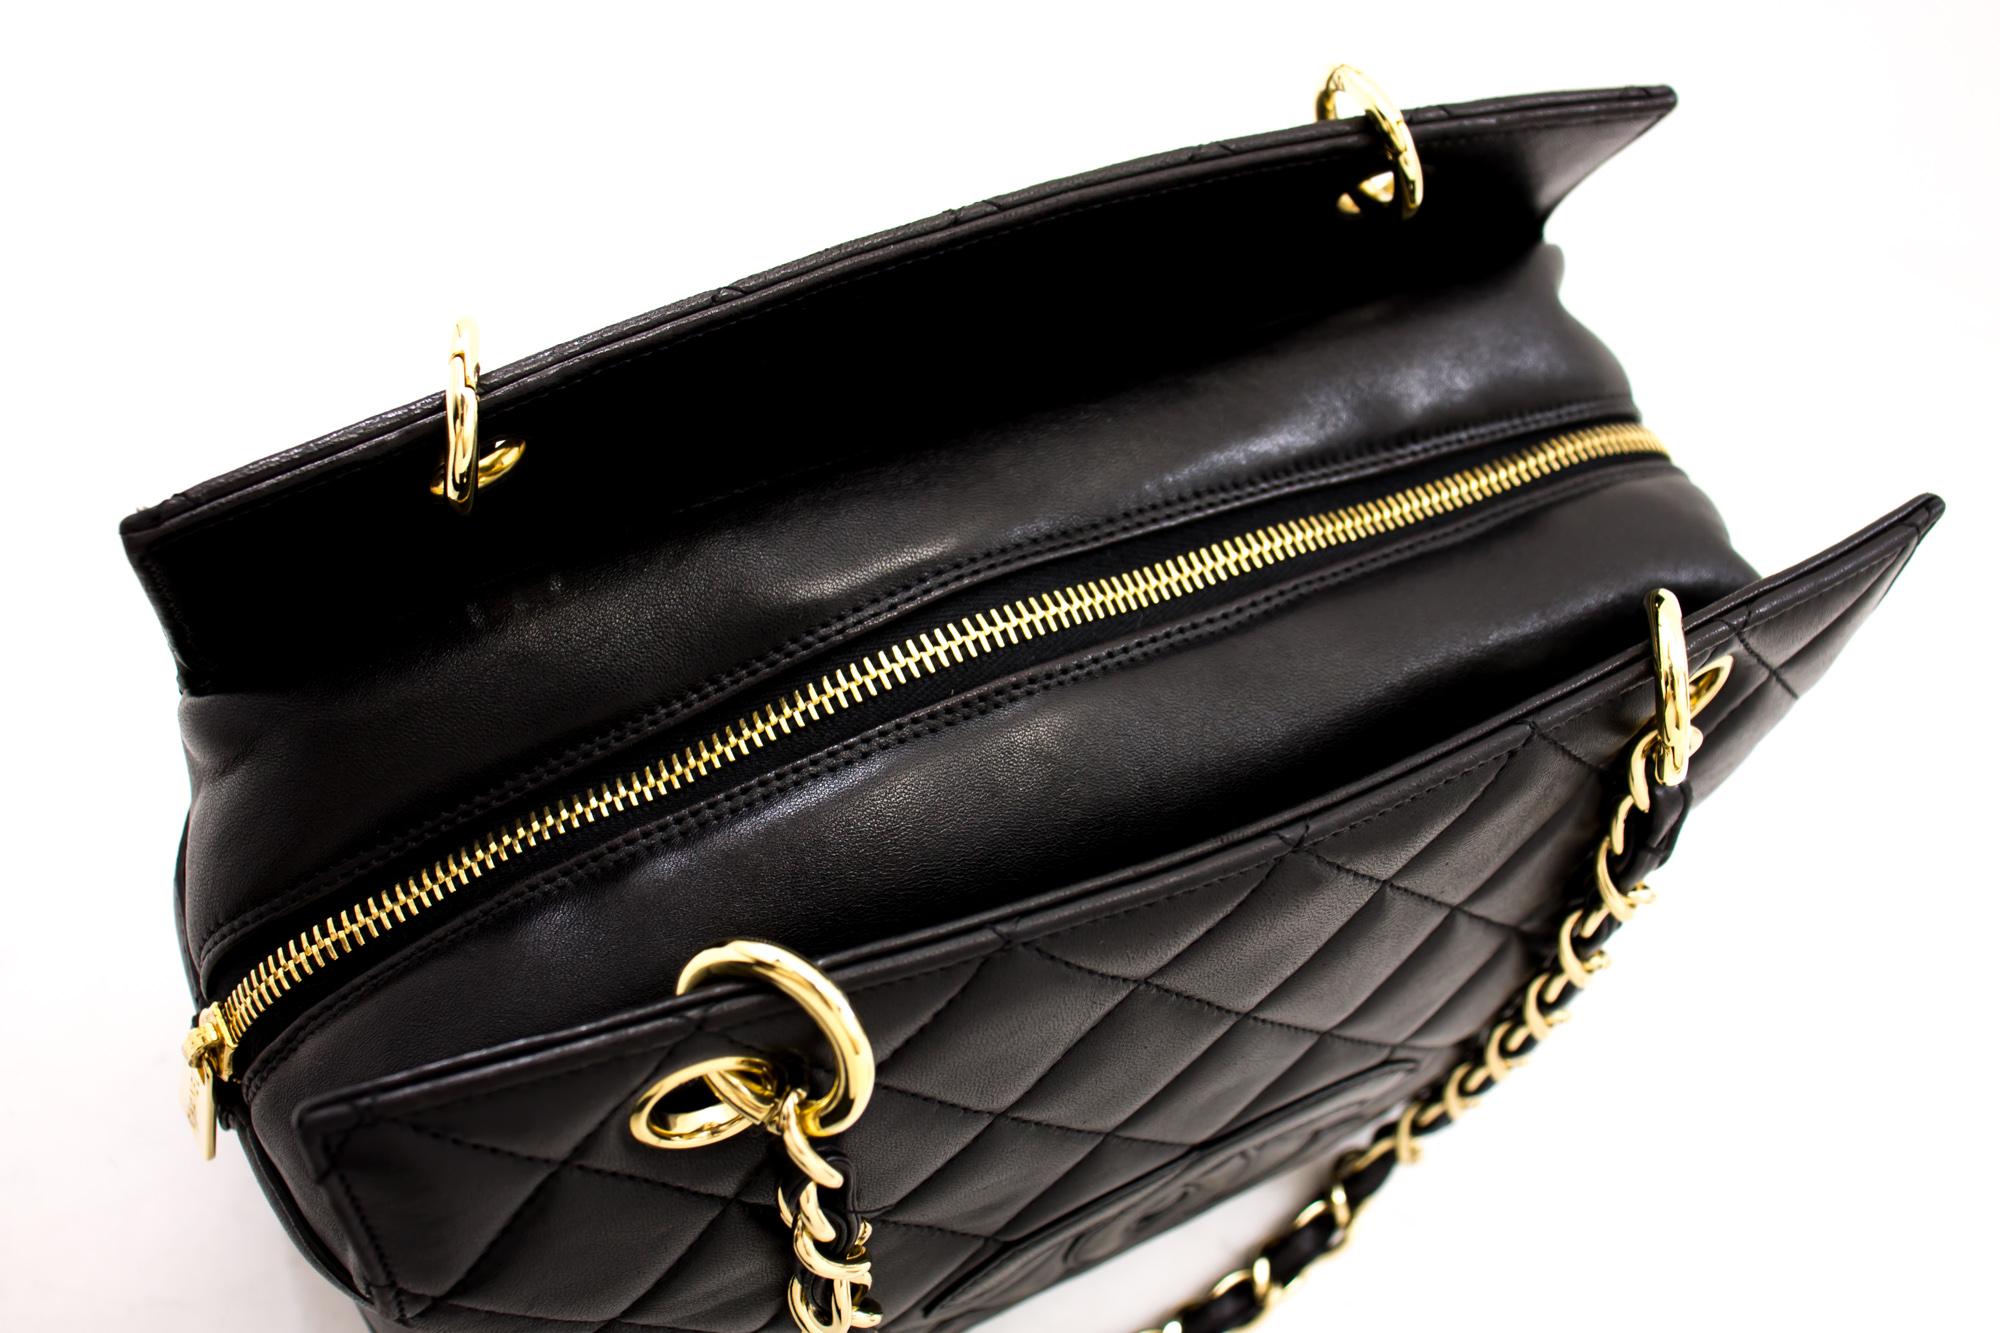 CHANEL Lambskin Chain Shoulder Shopping Tote Bag Black Quilted 5